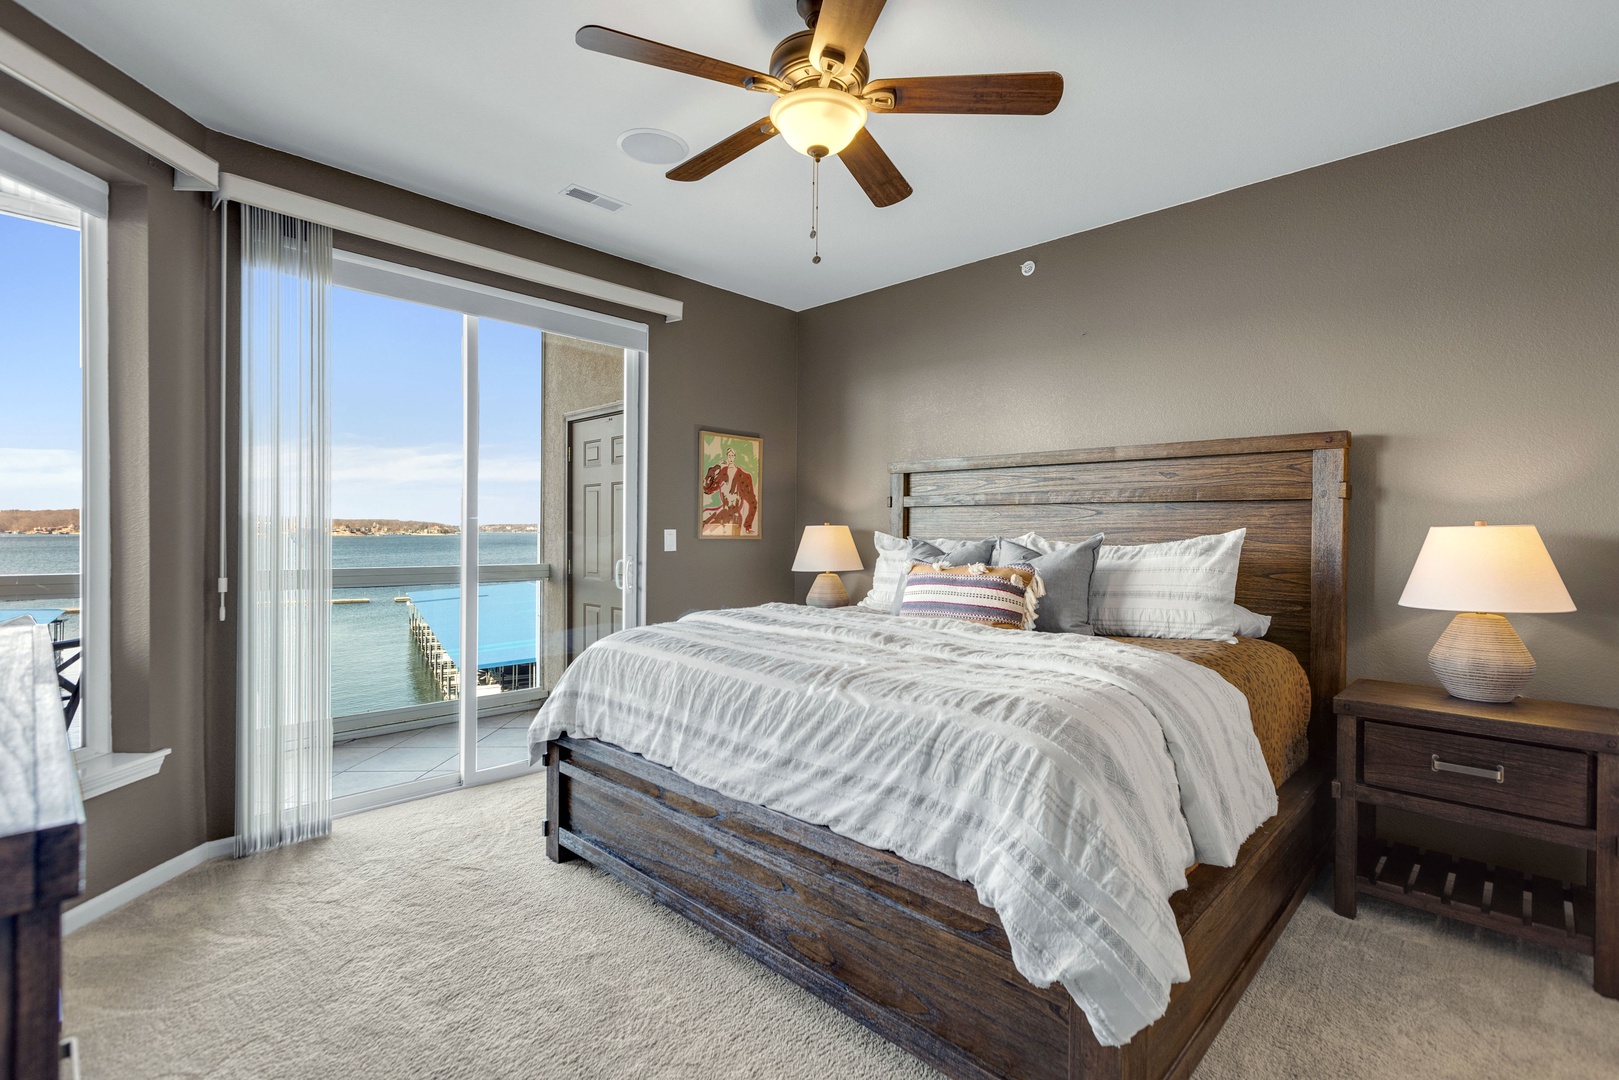 The primary suite boasts a king bed, private ensuite & deck access